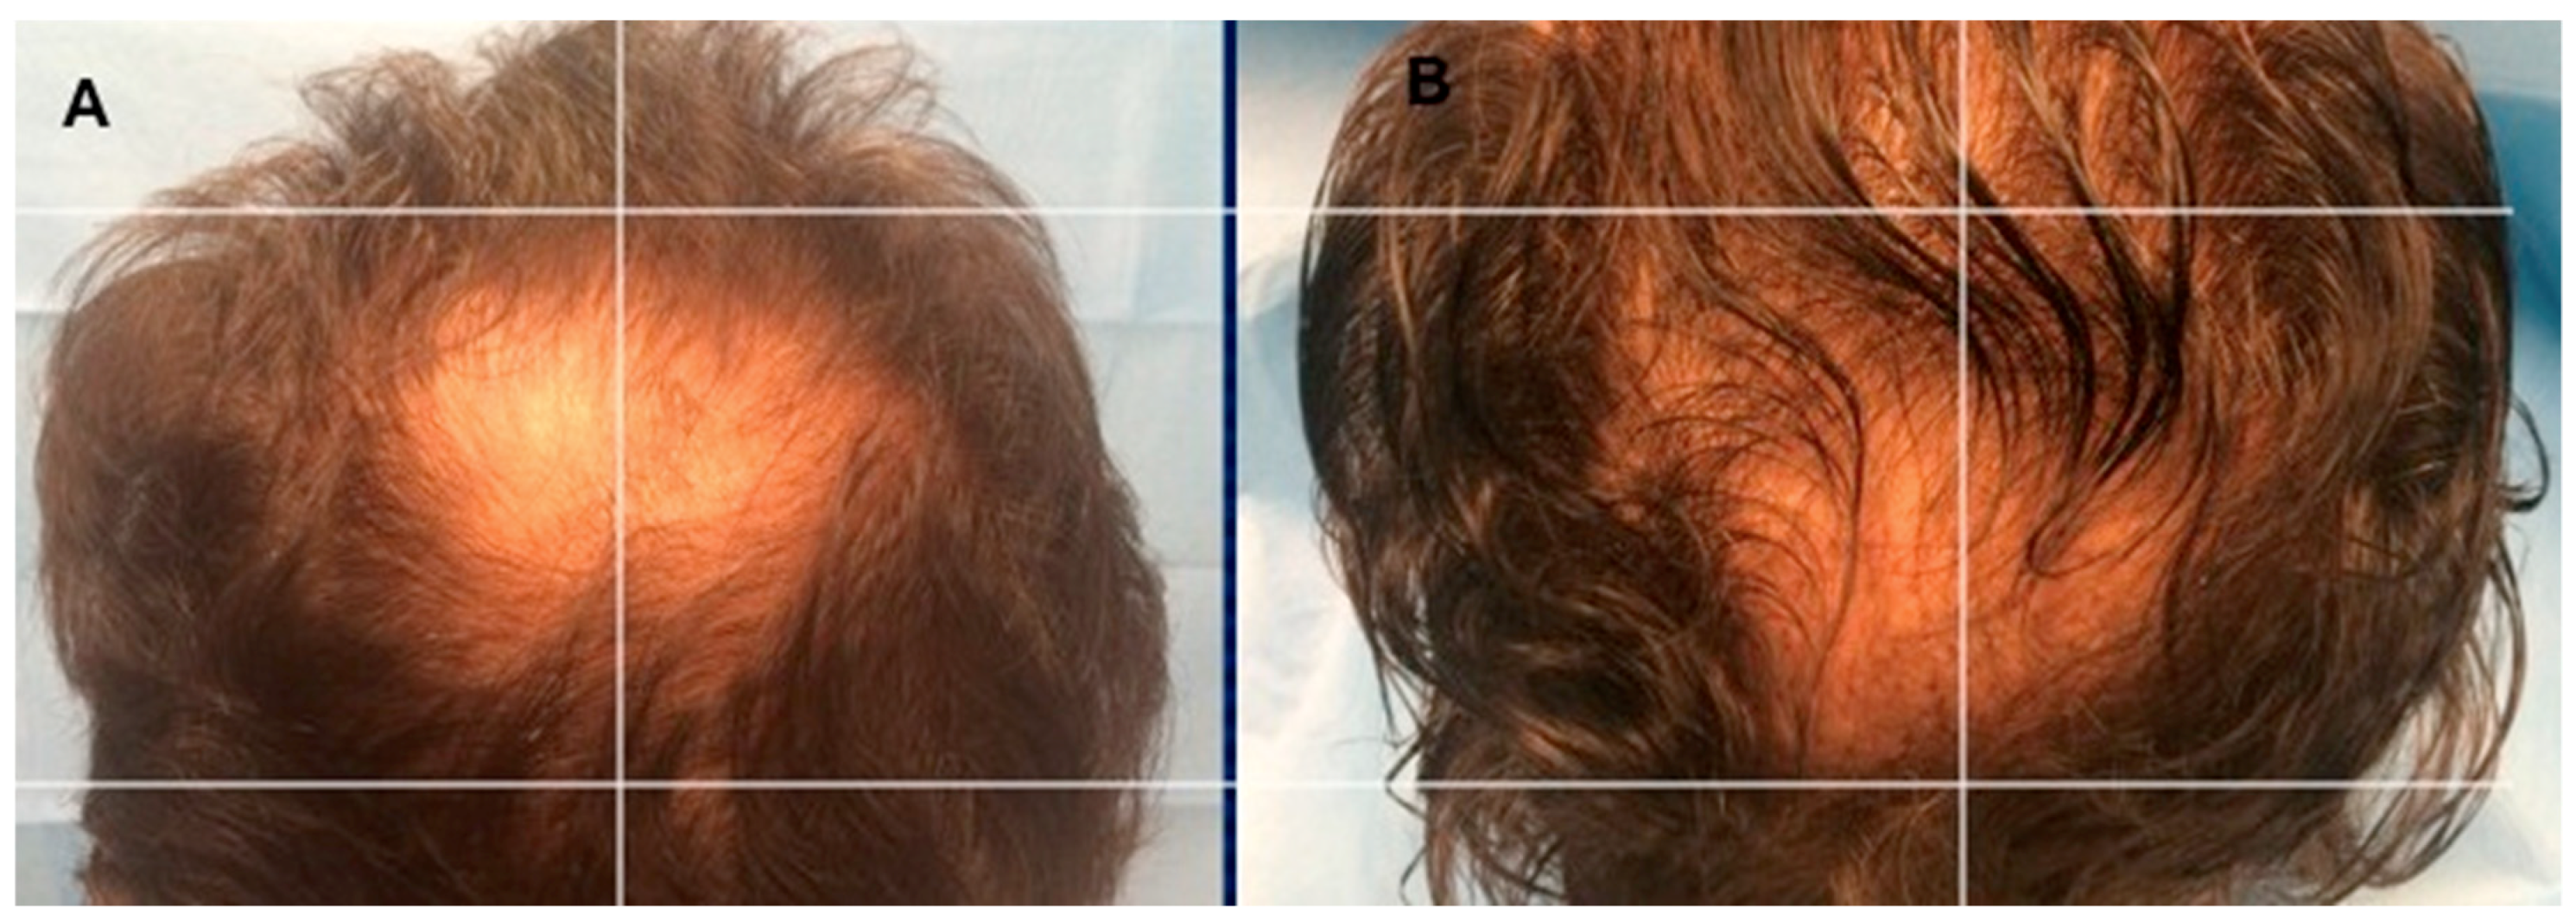 Biomedicines | Free Full-Text | Platelet-Rich Plasma and Micrografts  Enriched with Autologous Human Follicle Mesenchymal Stem Cells Improve Hair  Re-Growth in Androgenetic Alopecia. Biomolecular Pathway Analysis and  Clinical Evaluation